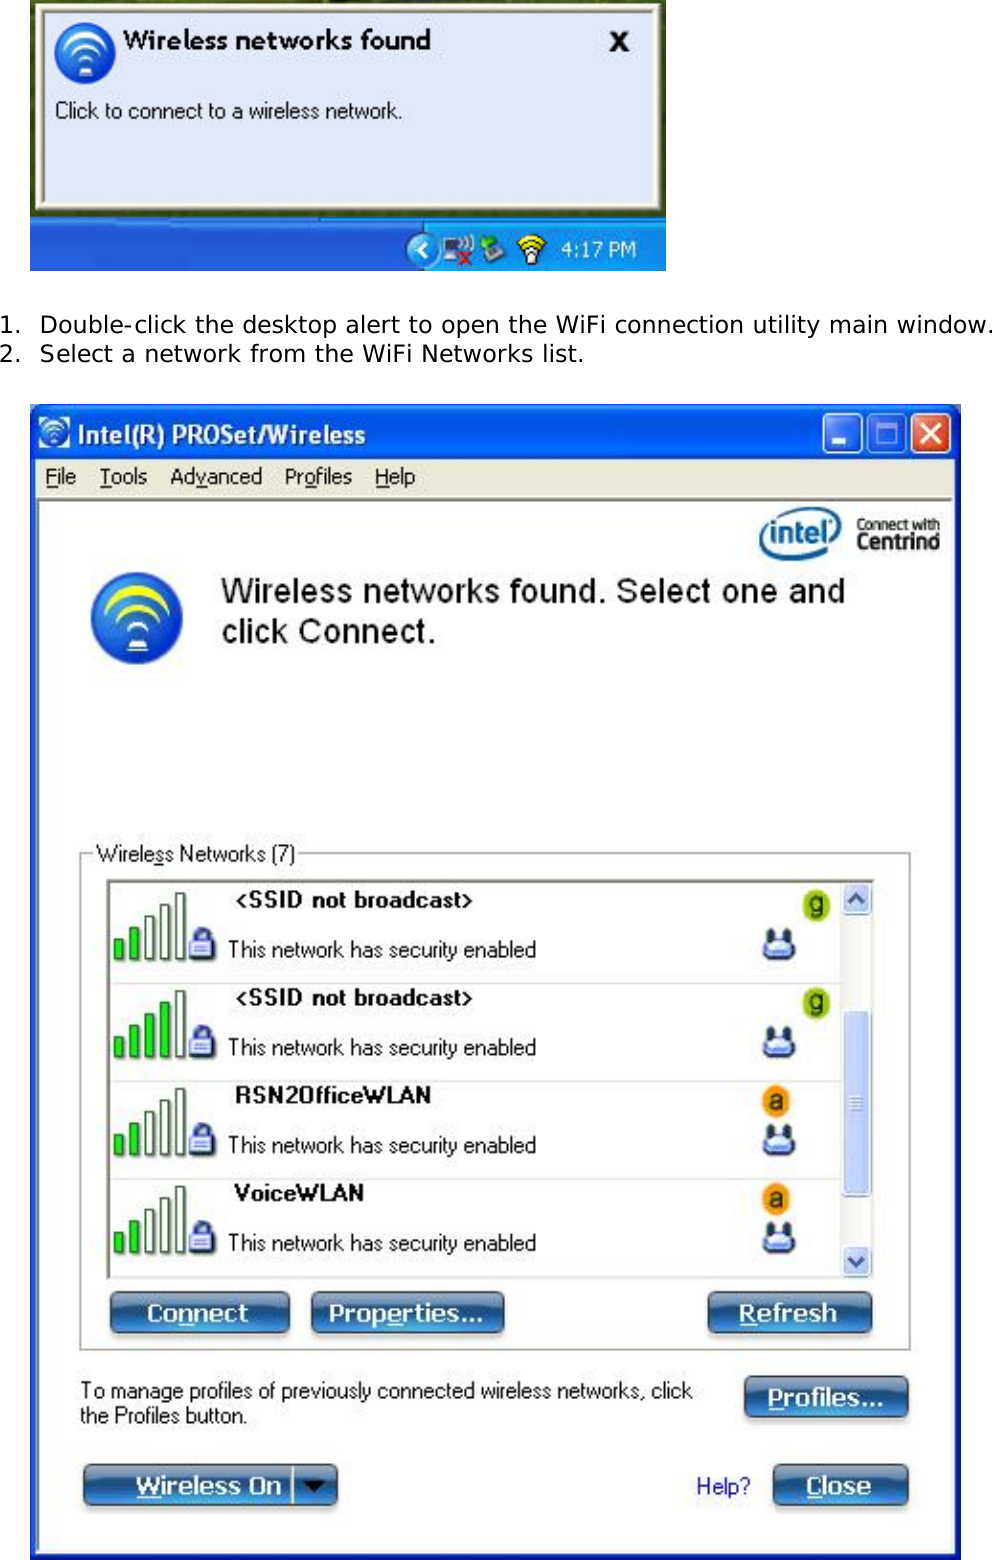  1.  Double-click the desktop alert to open the WiFi connection utility main window. 2.  Select a network from the WiFi Networks list.